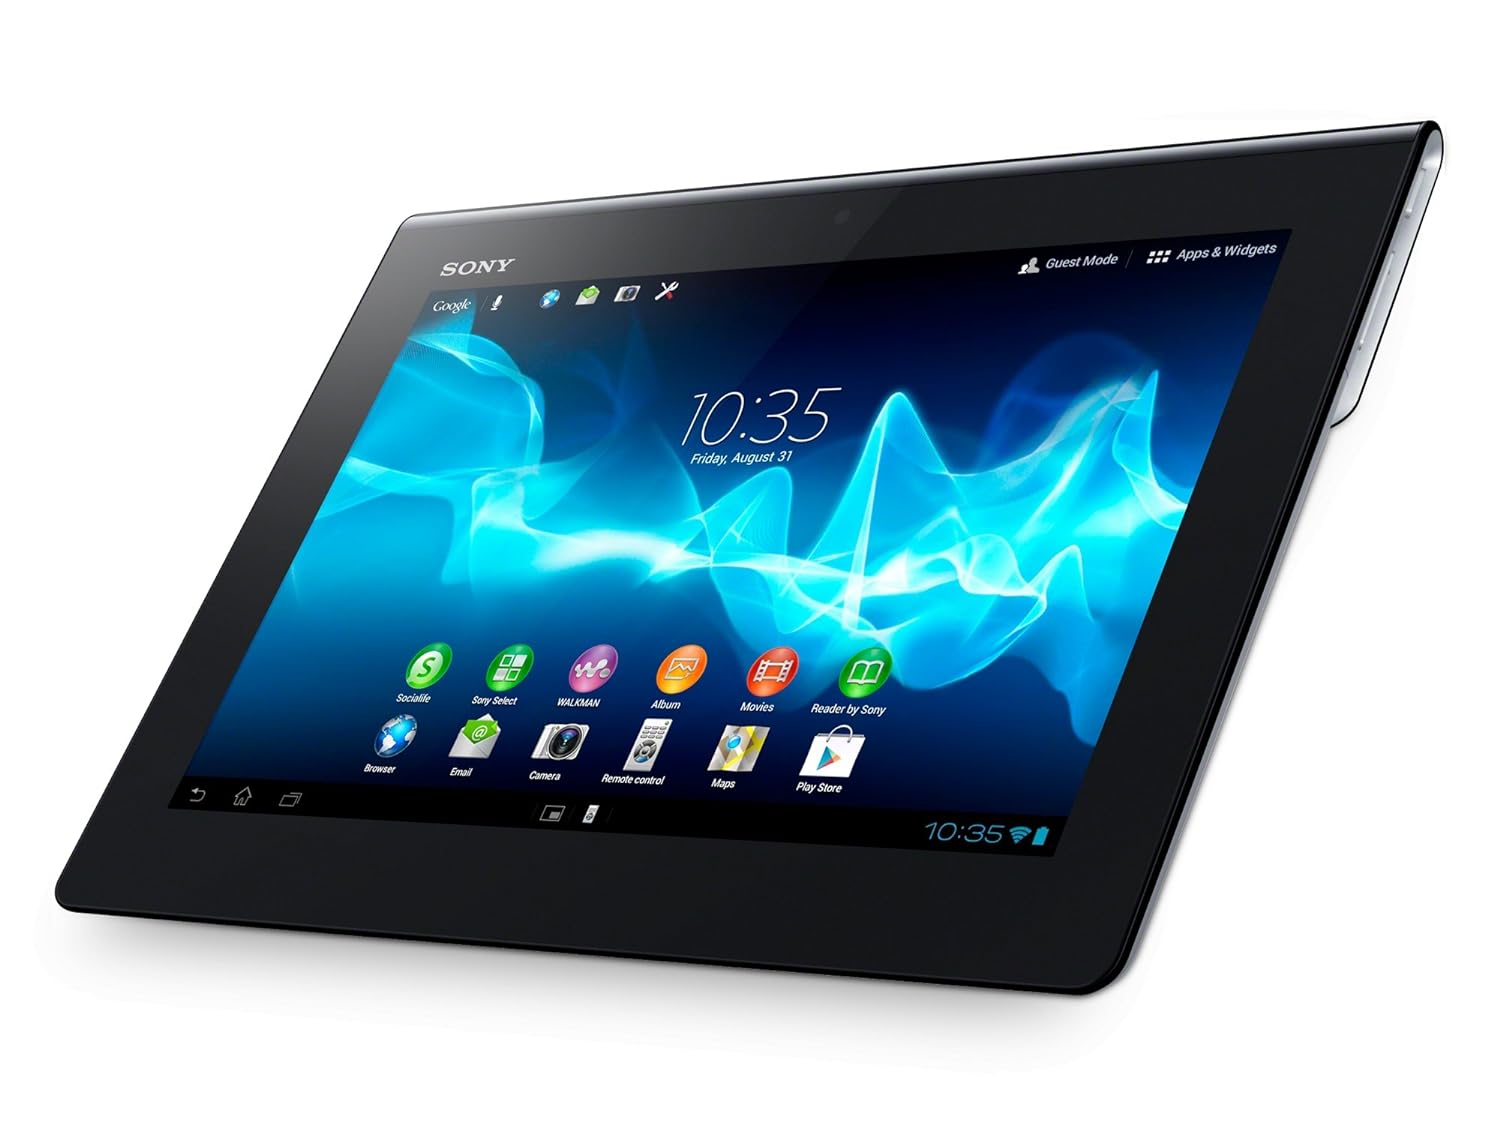 Sony SGPT121 Xperia Tablet S 16GB Flash